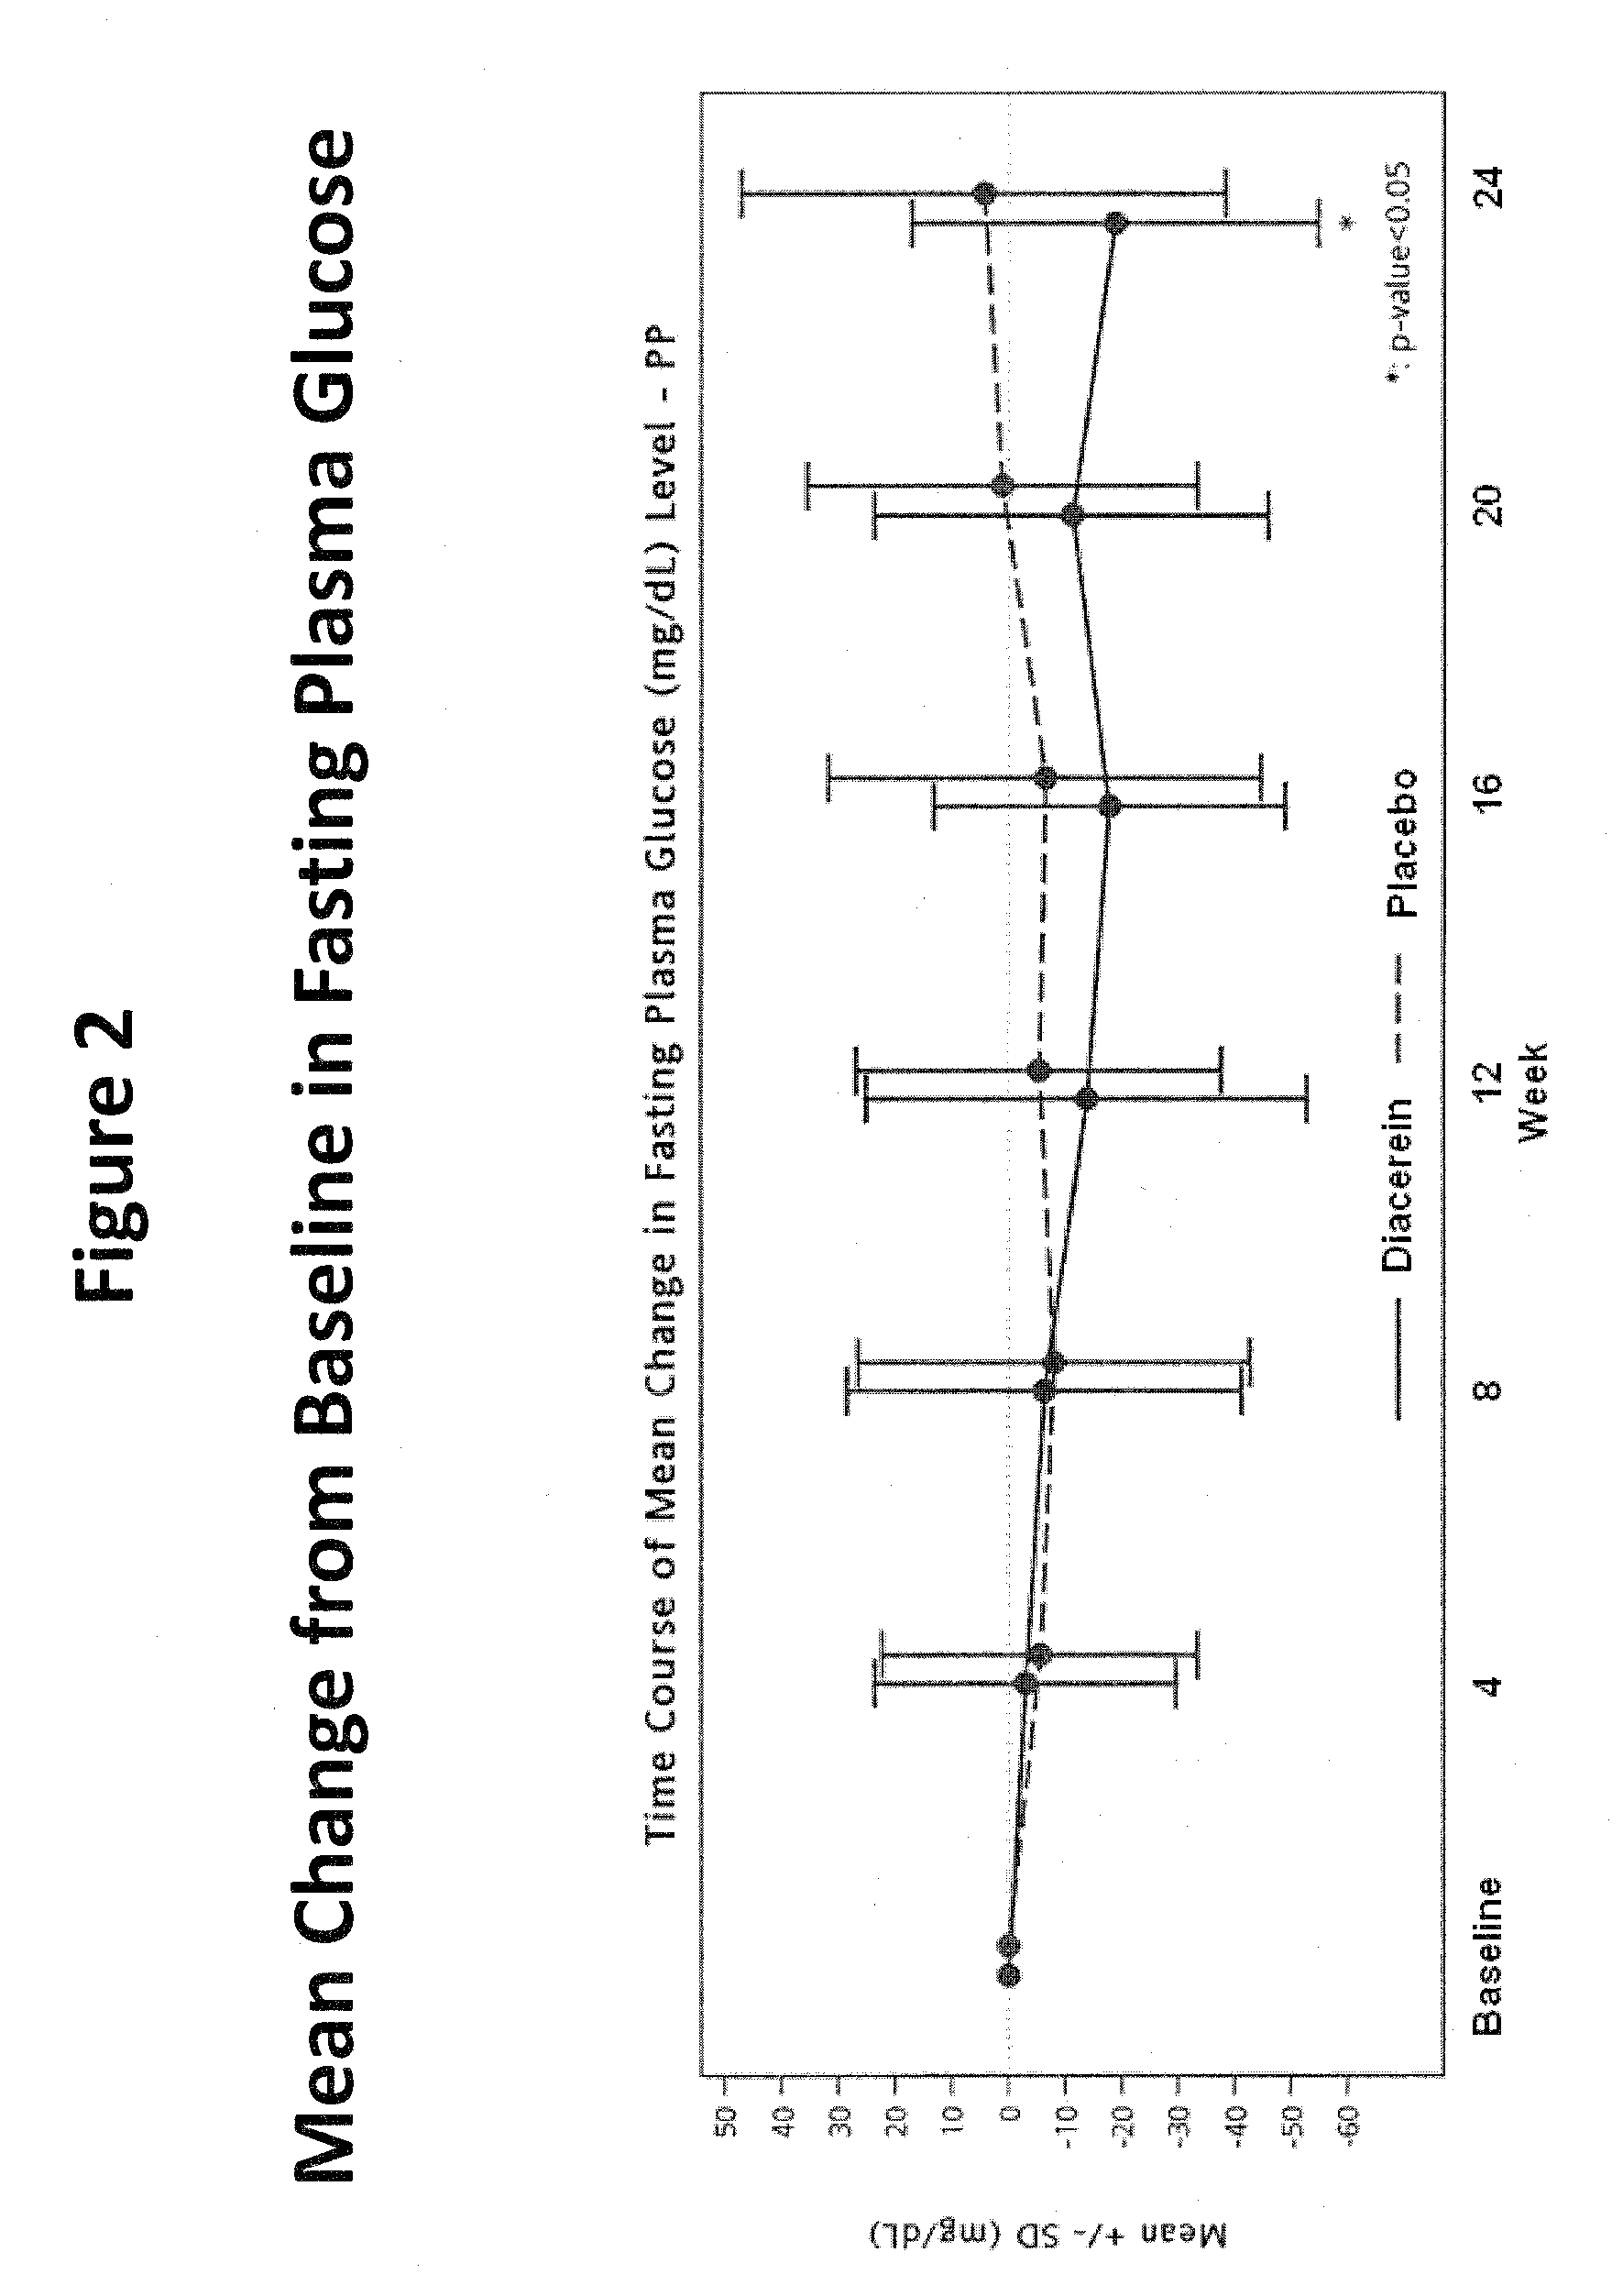 Methods of Using Diacerein as an Adjunctive Therapy for Diabetes